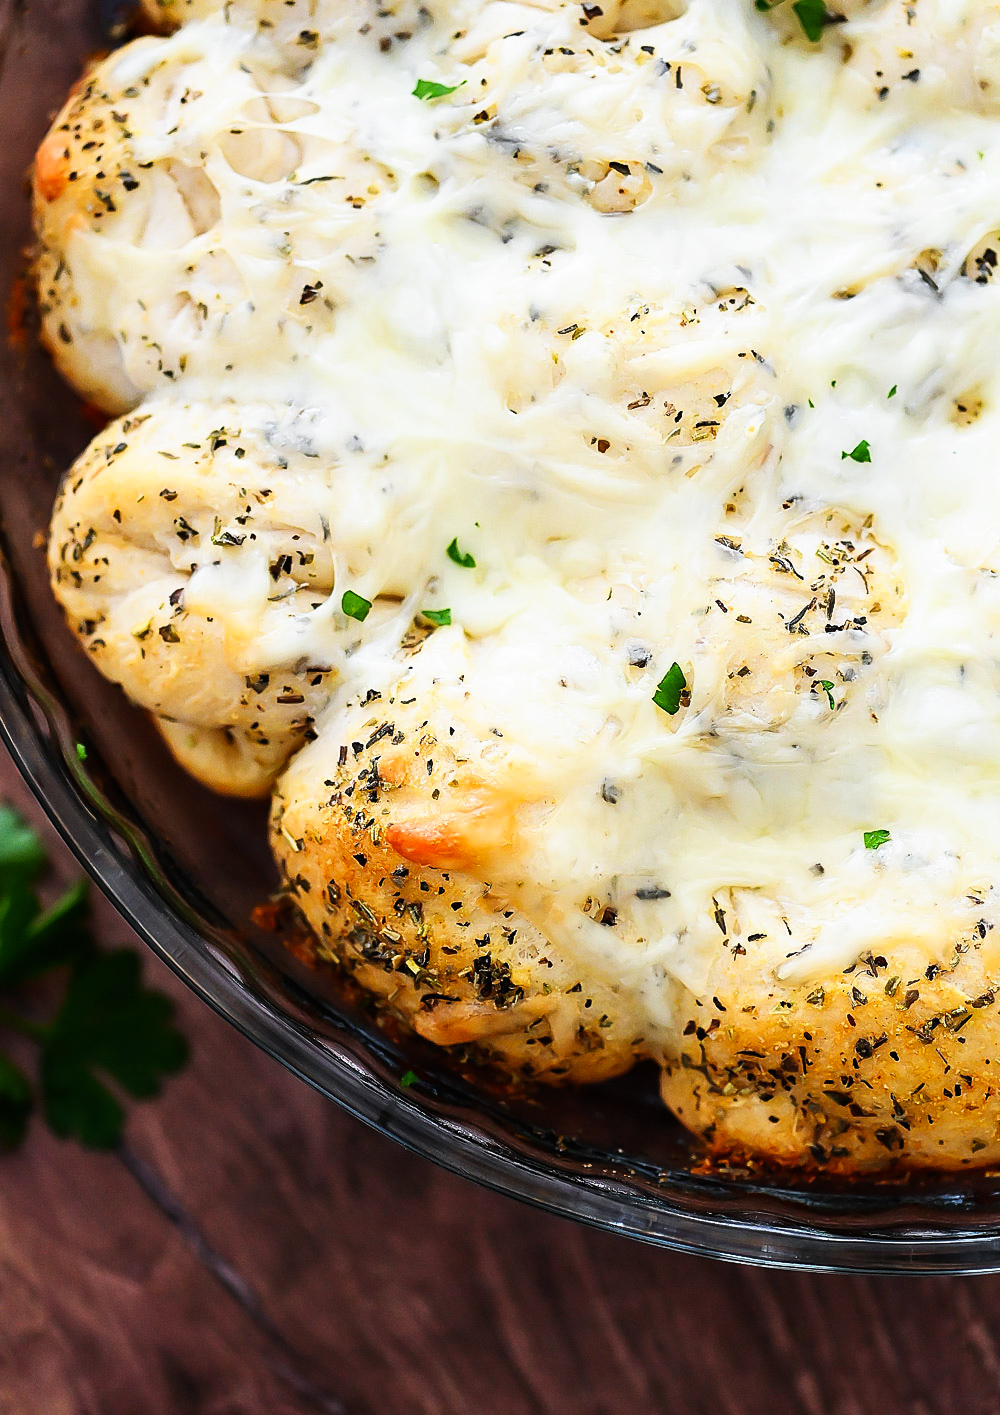 Cheesy Garlic Pull Apart Rolls are buttermilk biscuits covered in melted Mozzarella cheese, herbs and garlic butter.